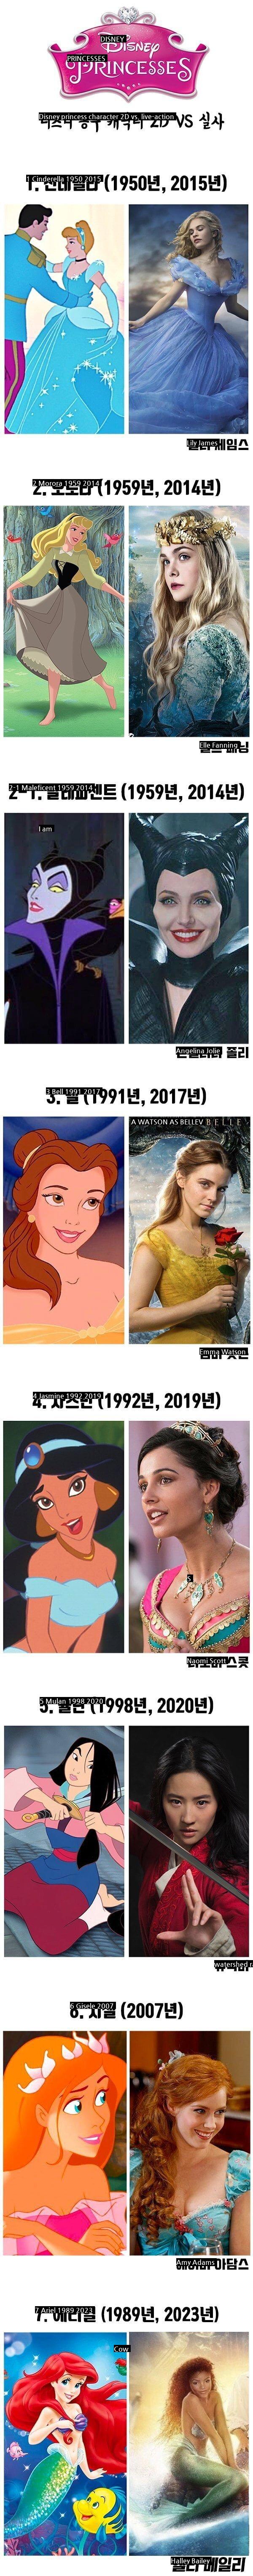 The situation of the female lead in Disney's live-action movies.jpg